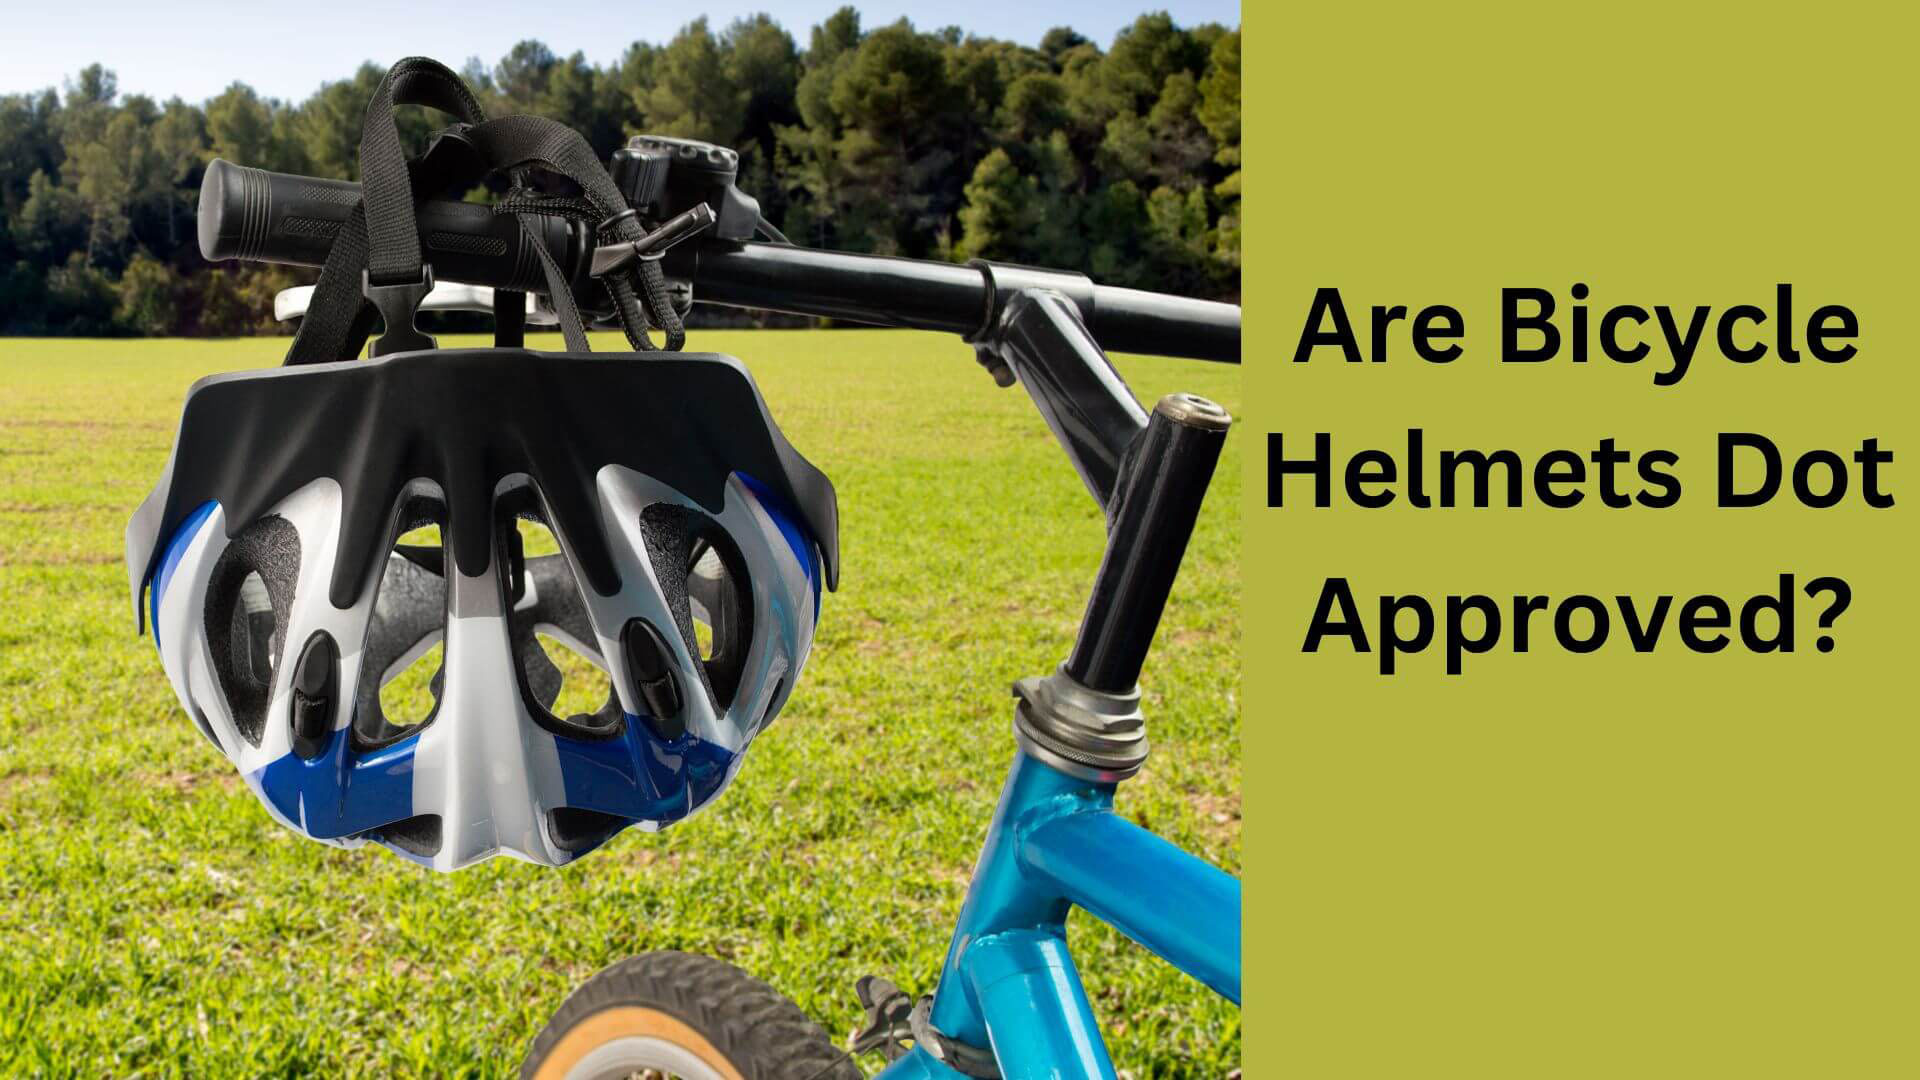 Are Bicycle Helmets Dot Approved in Your State?